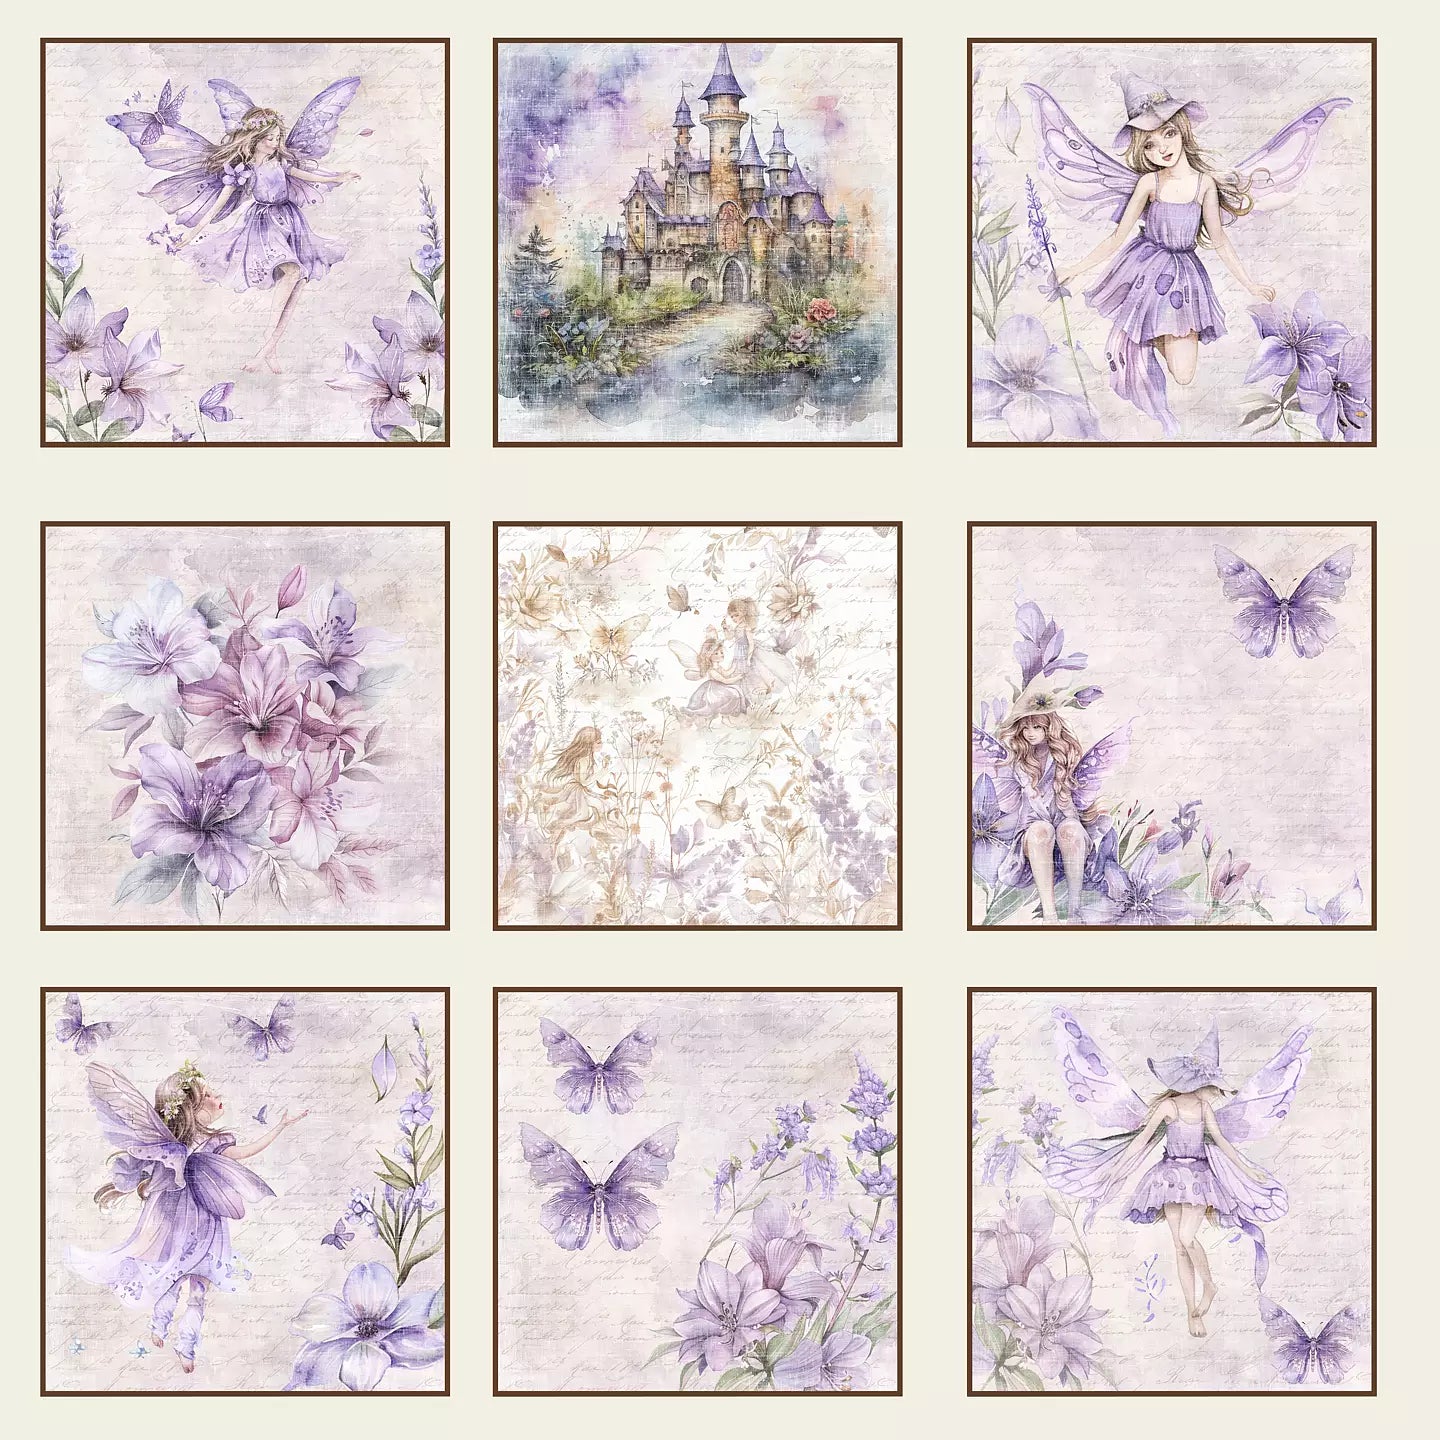 NYHET! Reprint Paperpack - Fairies Collection Paperpack - 12x12